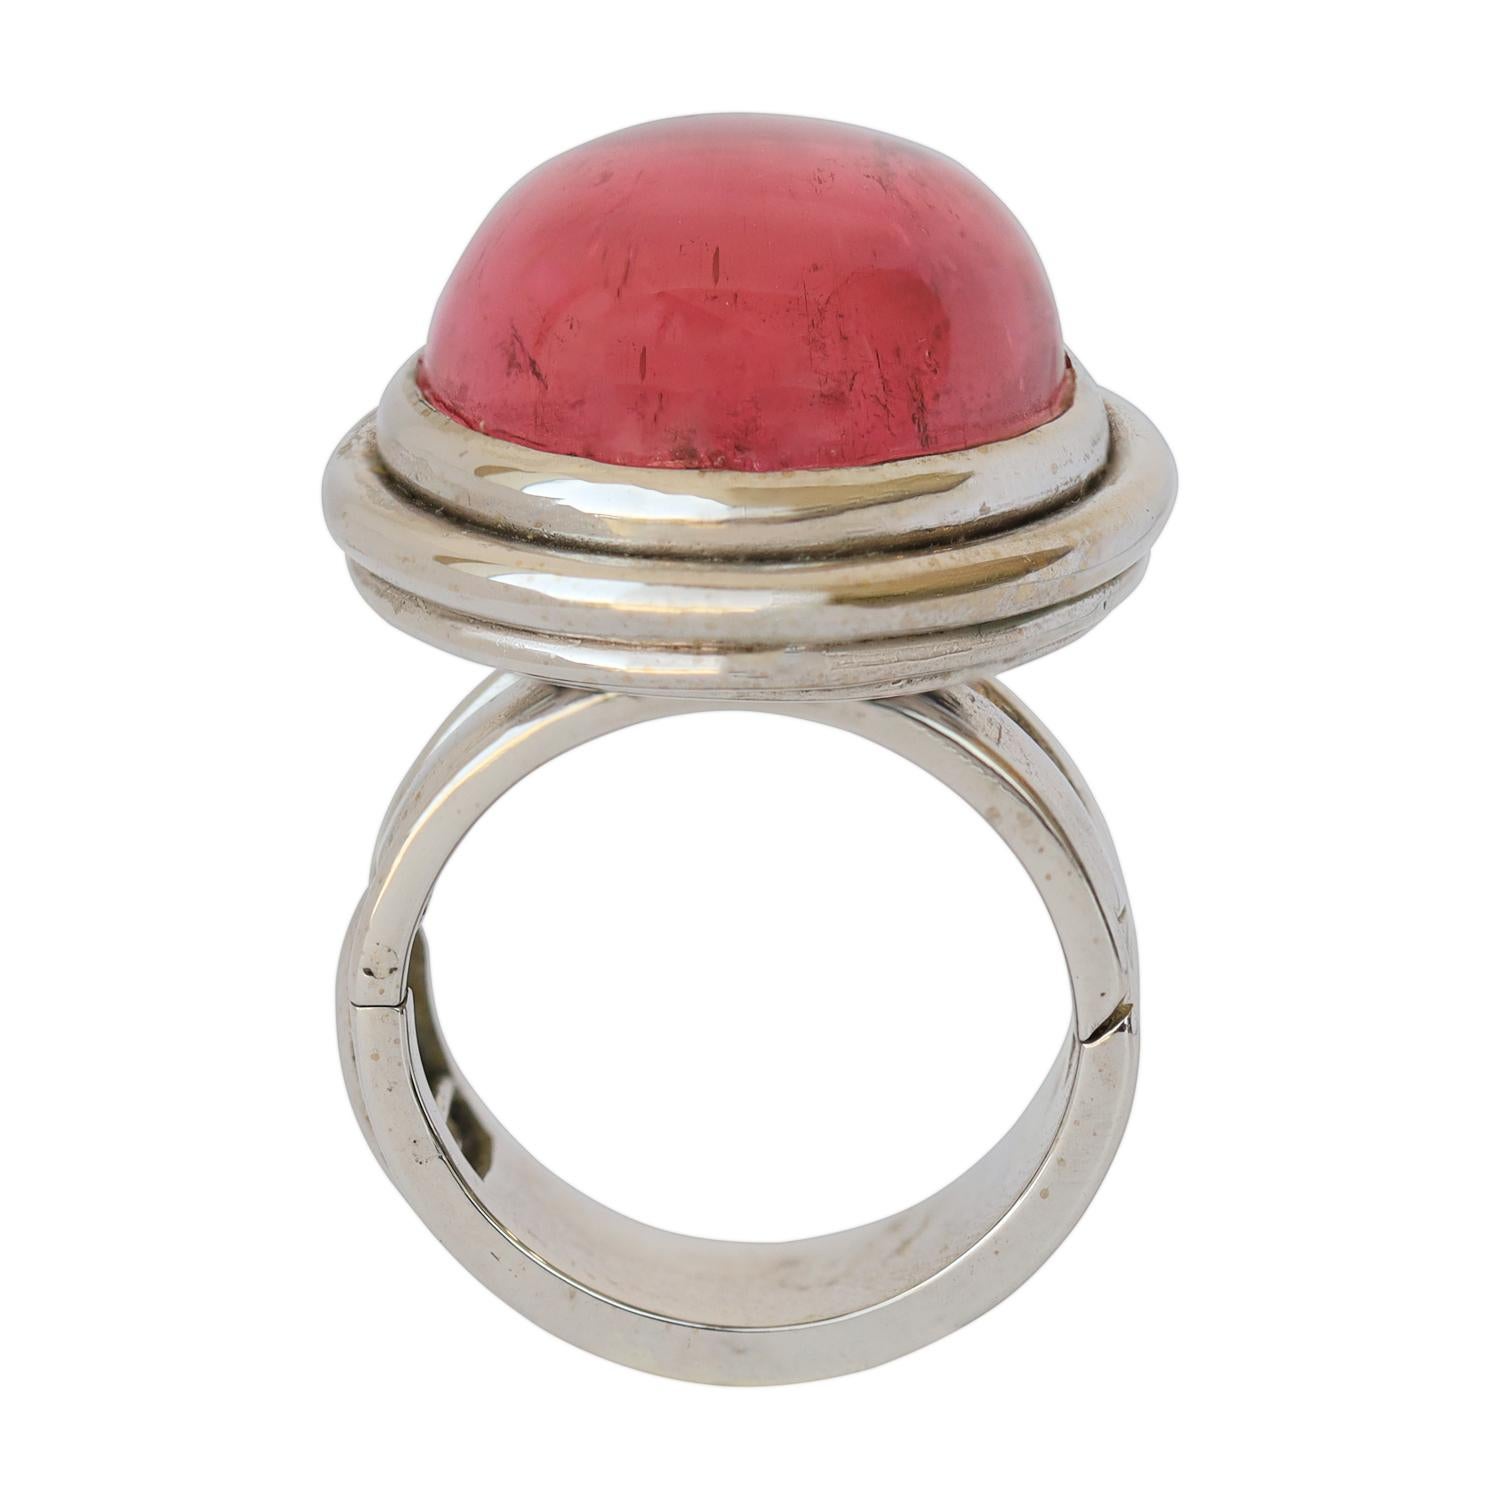 A stunning, generously sized oval-shaped cabochon pink tourmaline, weighing around 30 carats, graces this ring. It is elegantly nestled within a two-tier bezel setting, featuring a delicate flower petal pattern on the under gallery. Crafted with